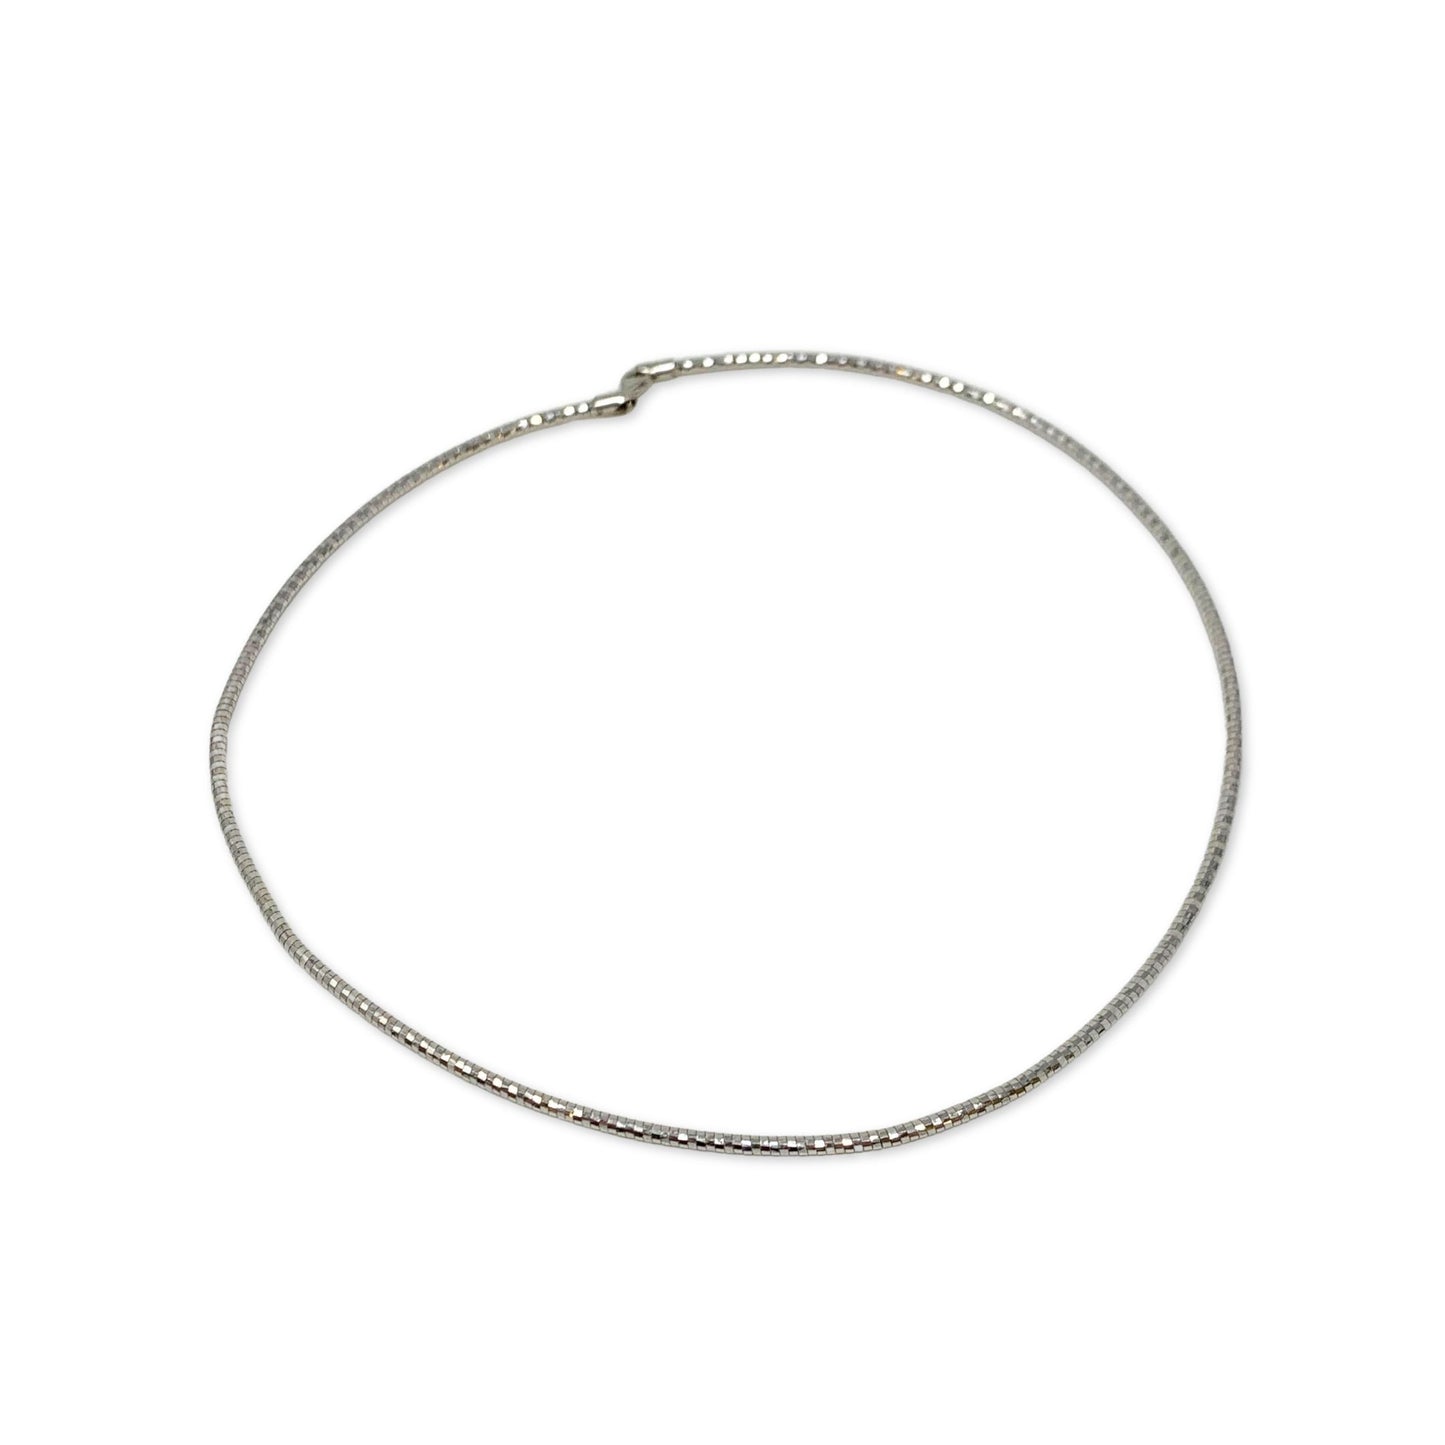 14K White Gold 15.5” Cable Necklace